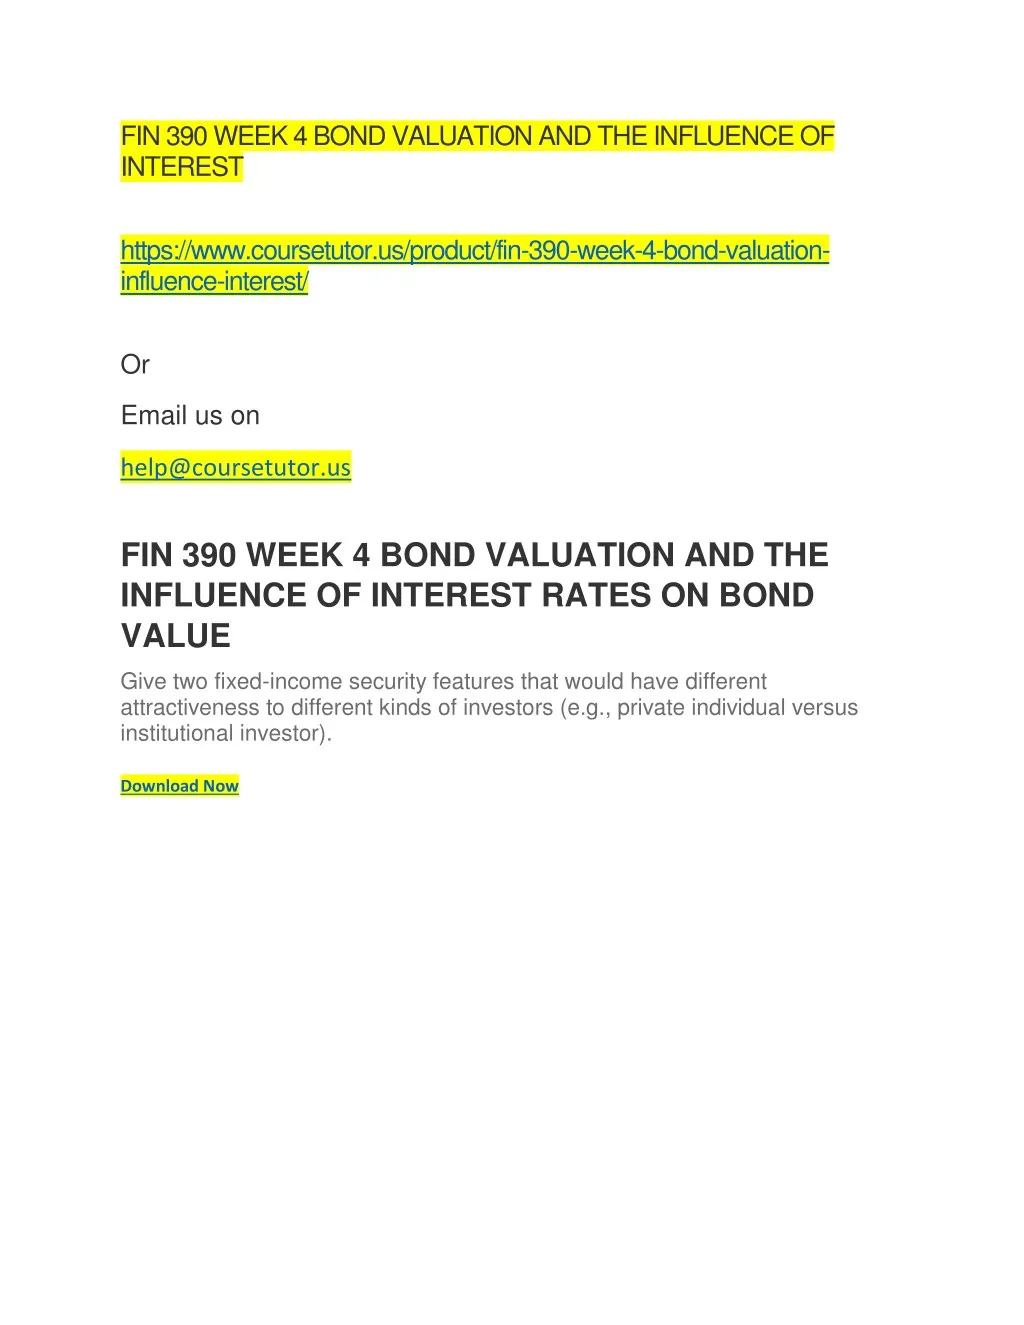 fin 390 week 4 bond valuation and the influence